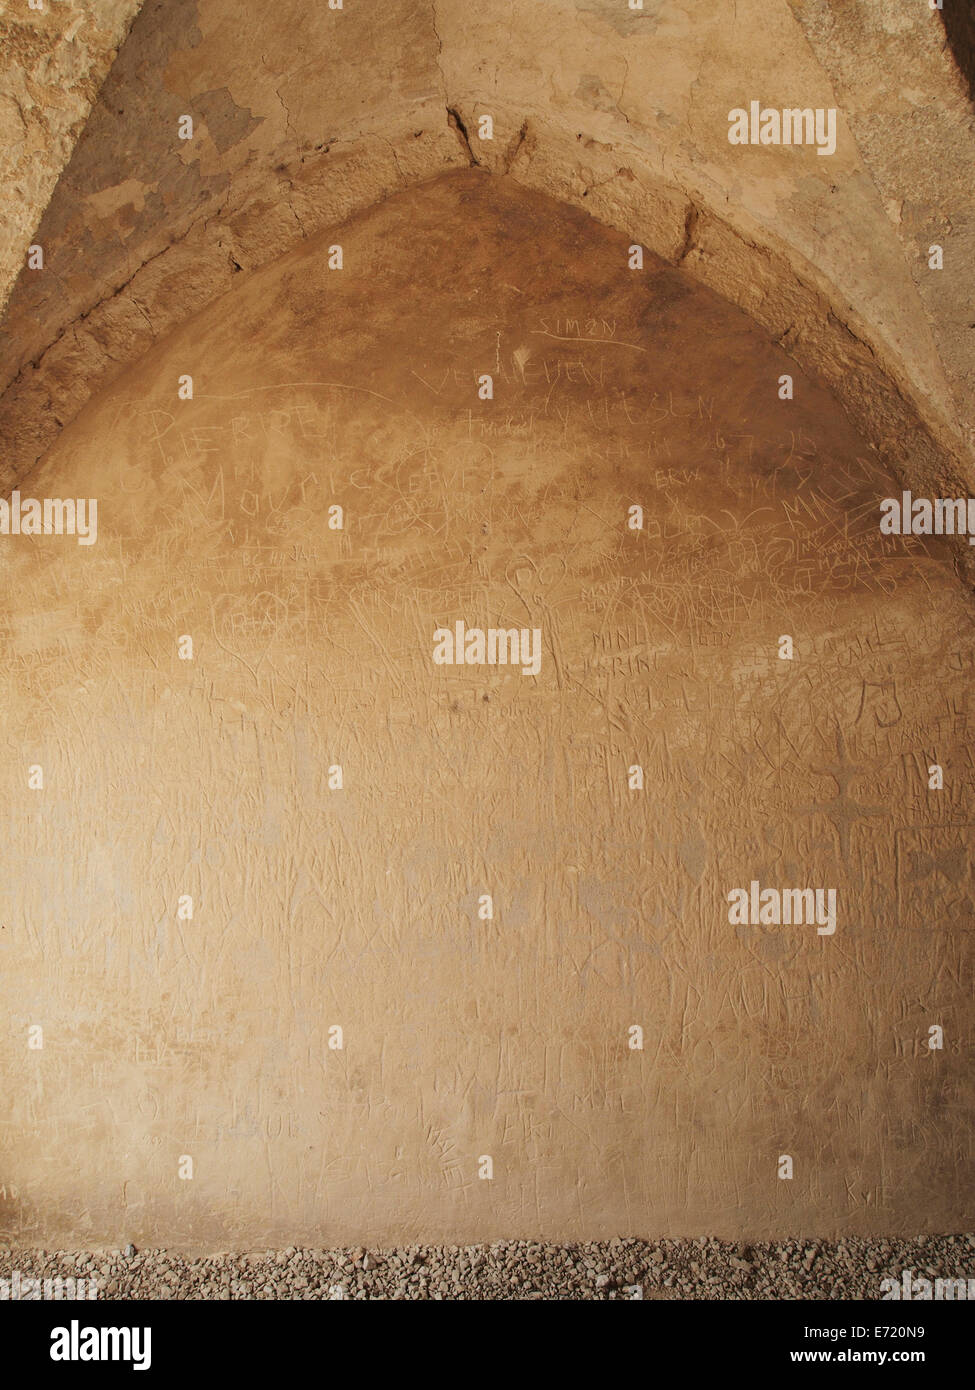 Names scratched into the wall under the gate of the Baume les Messieurs abbey, Jura region, France Stock Photo